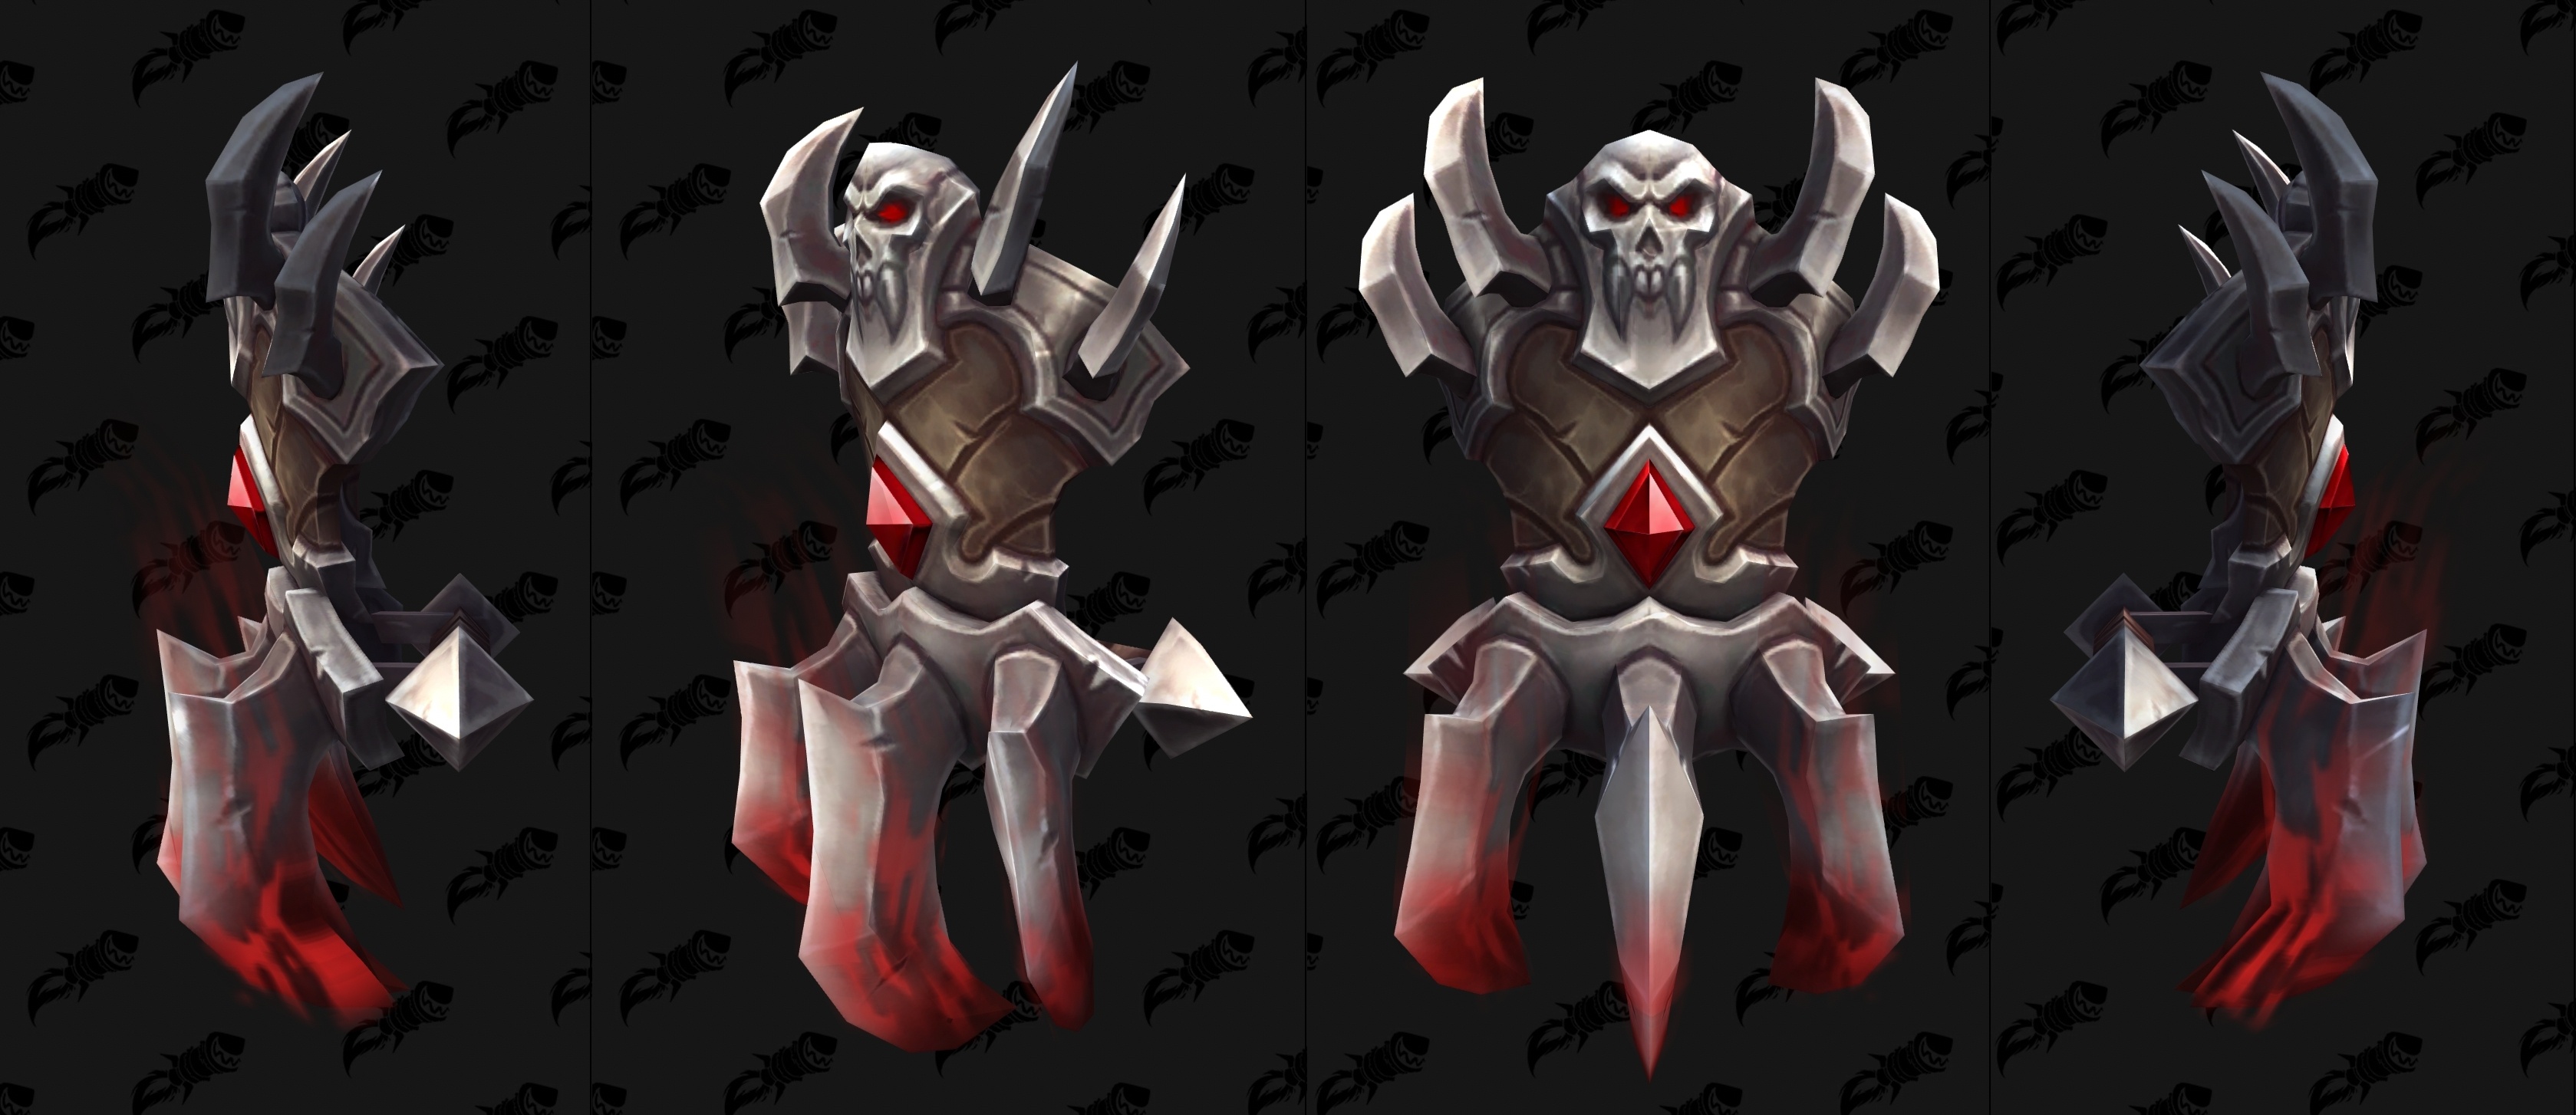 Concept Art of Covenant Armor and Weapons from the Shadowlands Art Book -  Wowhead News